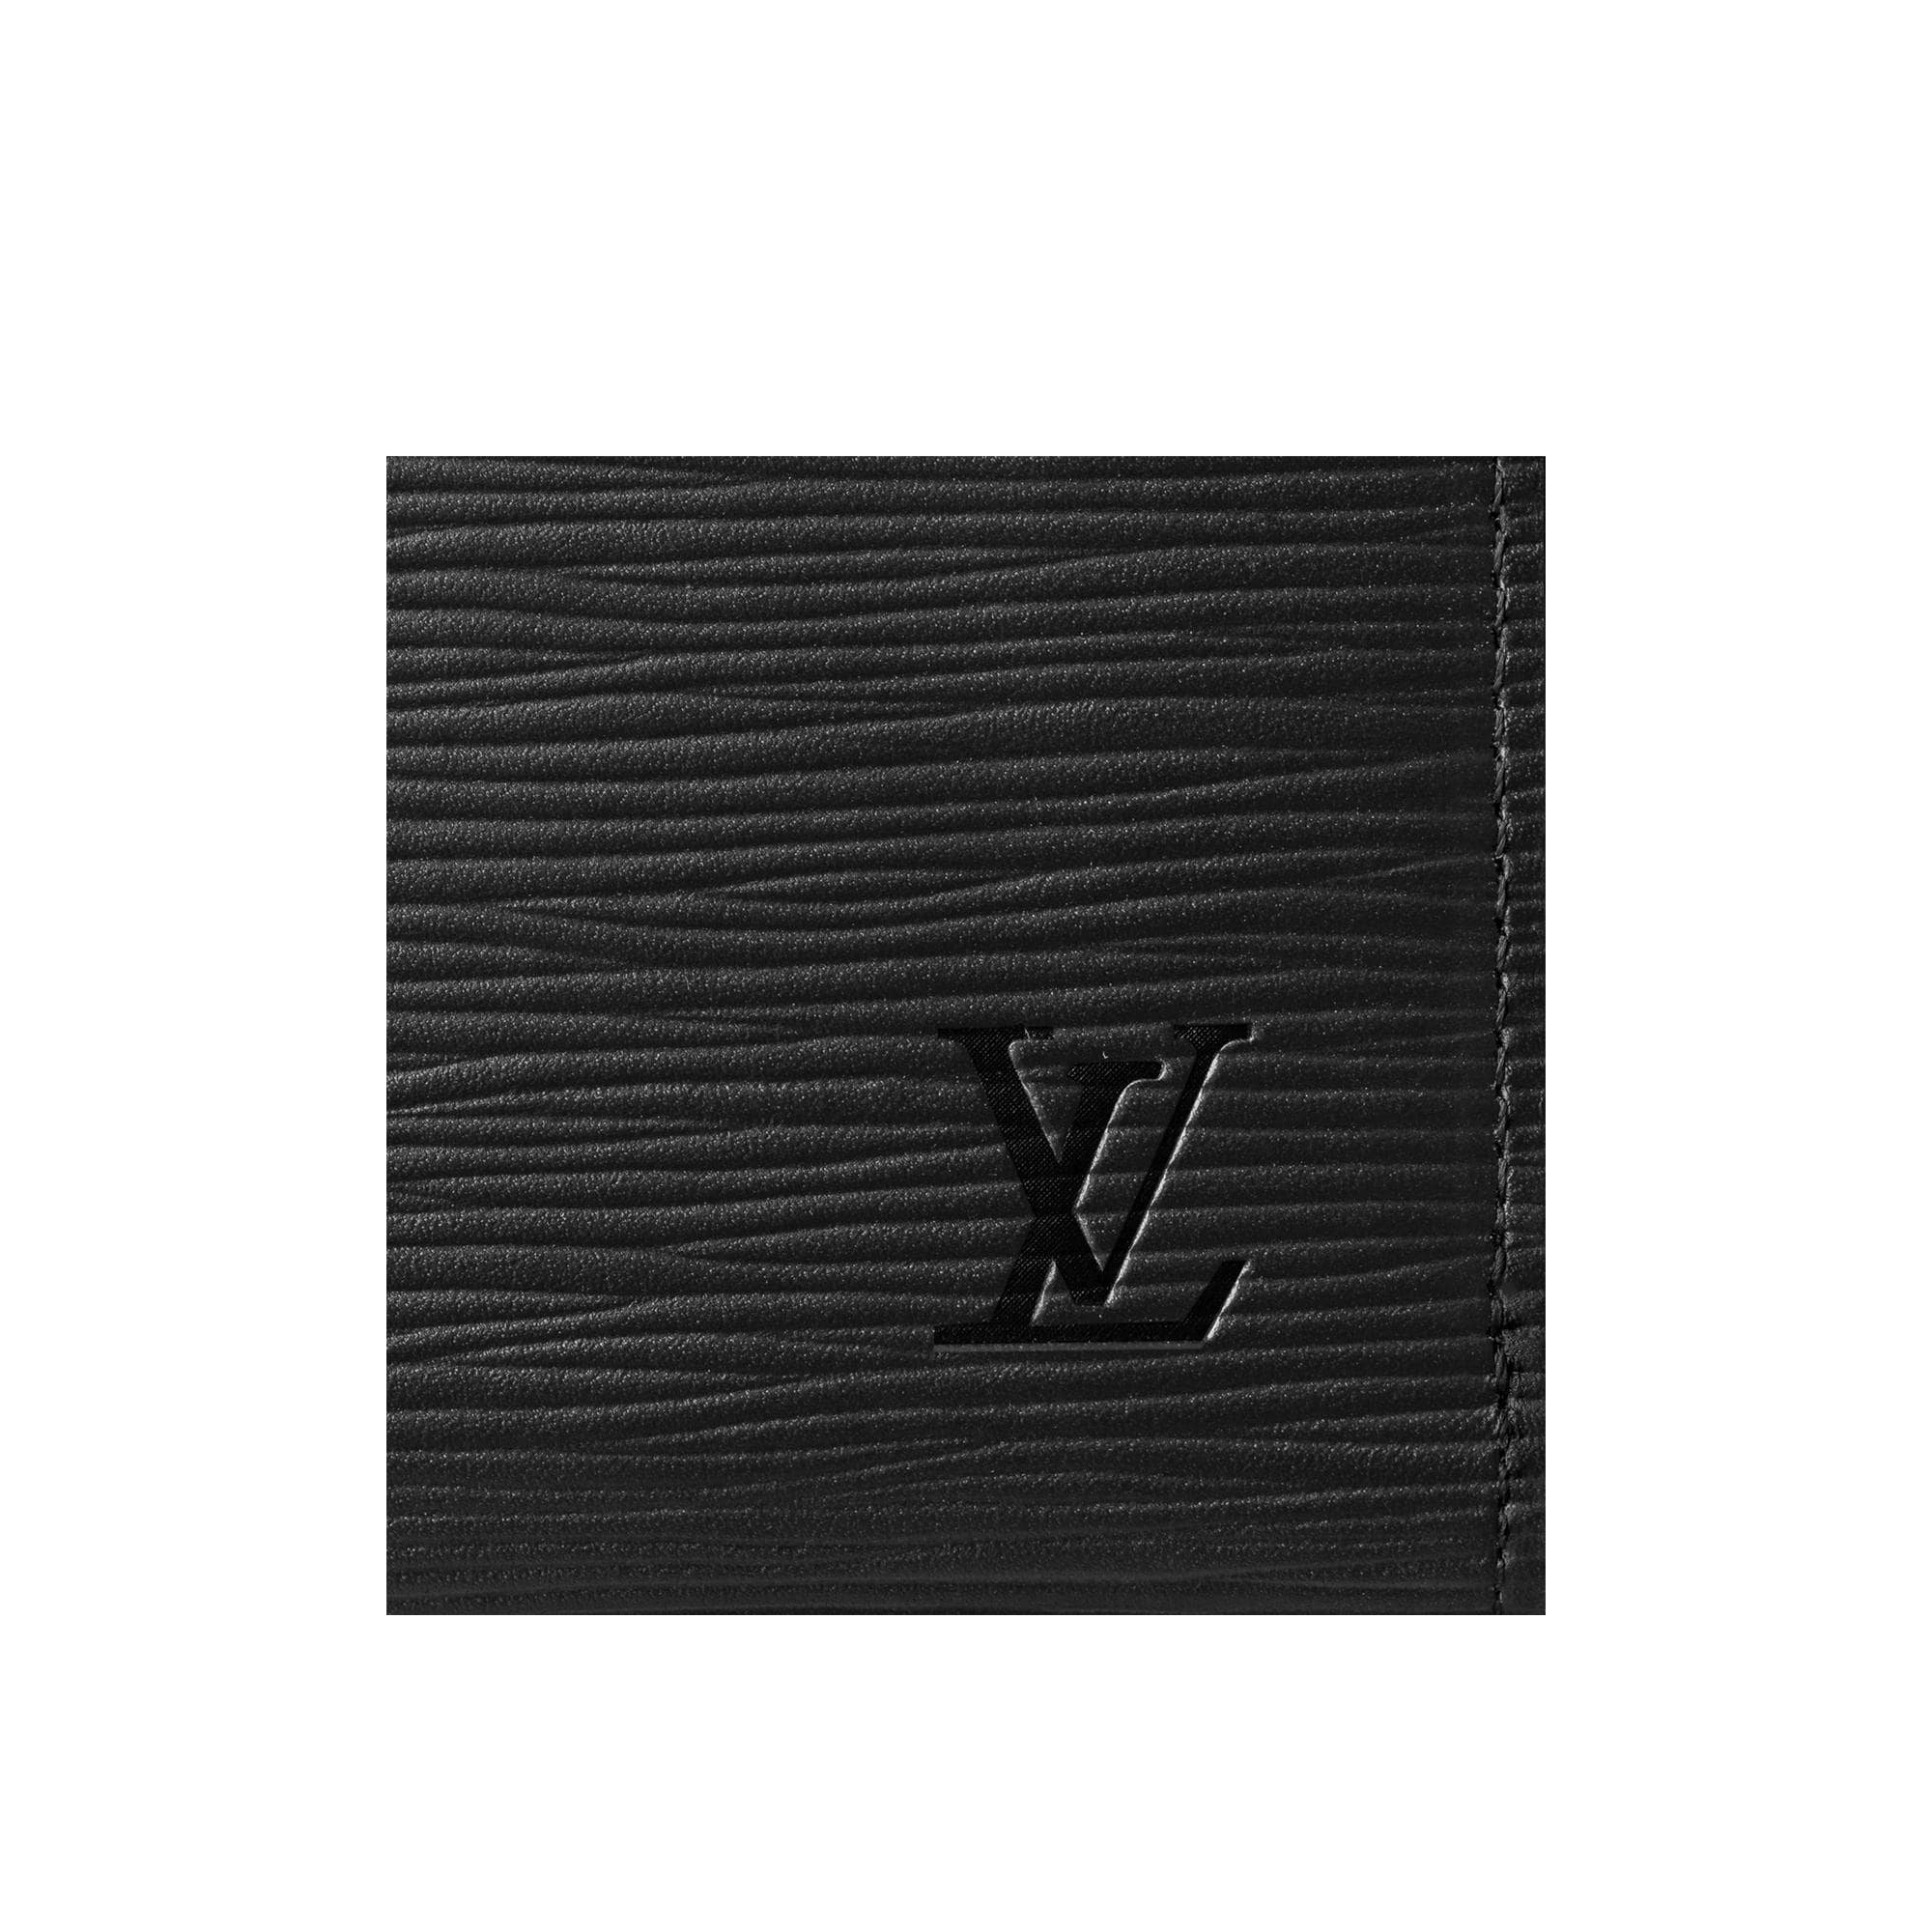 Louis Vuitton Small Logo - Small Leather Goods Zippy Organiser Epi Leather. Valentine's Day